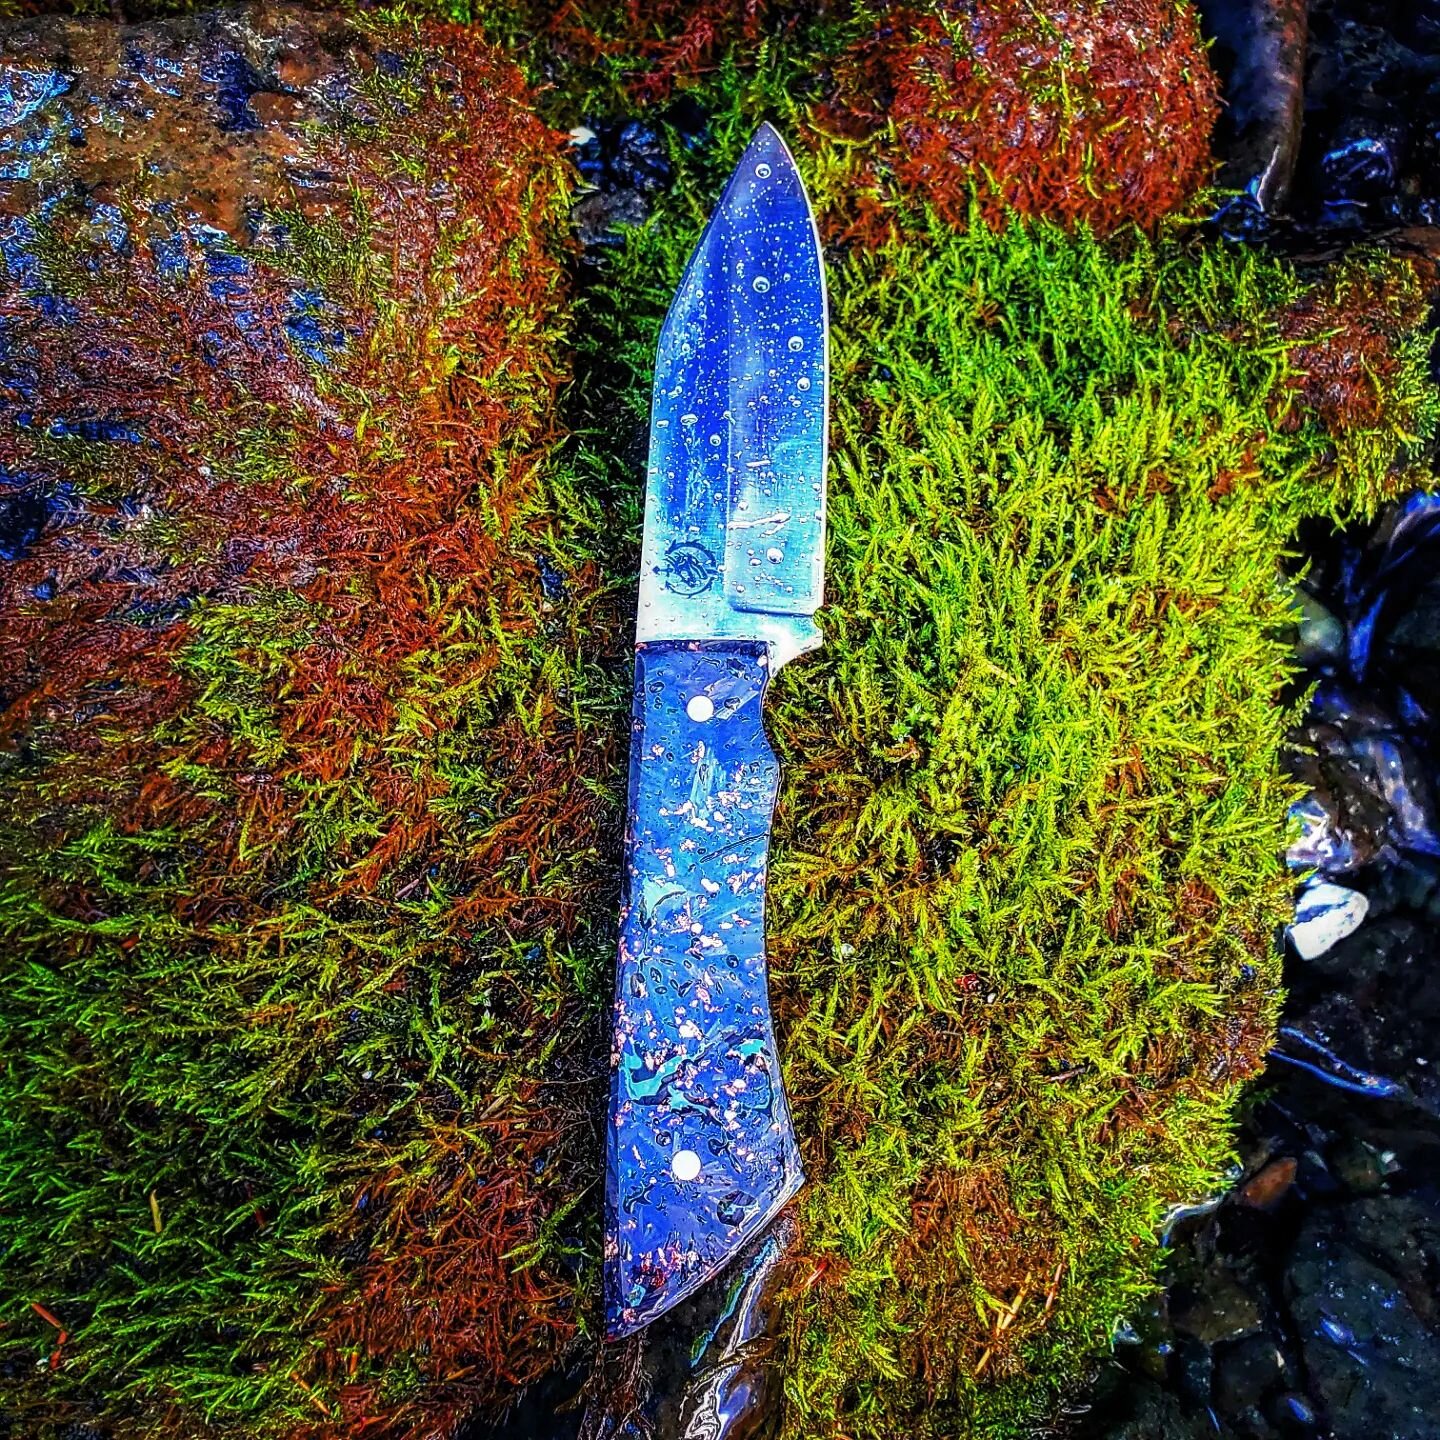 Camper in 52100 with carbon fiber scales and red G10 spacers. I'll have better pictures some other time. Out in the woods testing this out.

It will come with a black and red kydex sheath. Up on the website in a few days, or message me now for detail